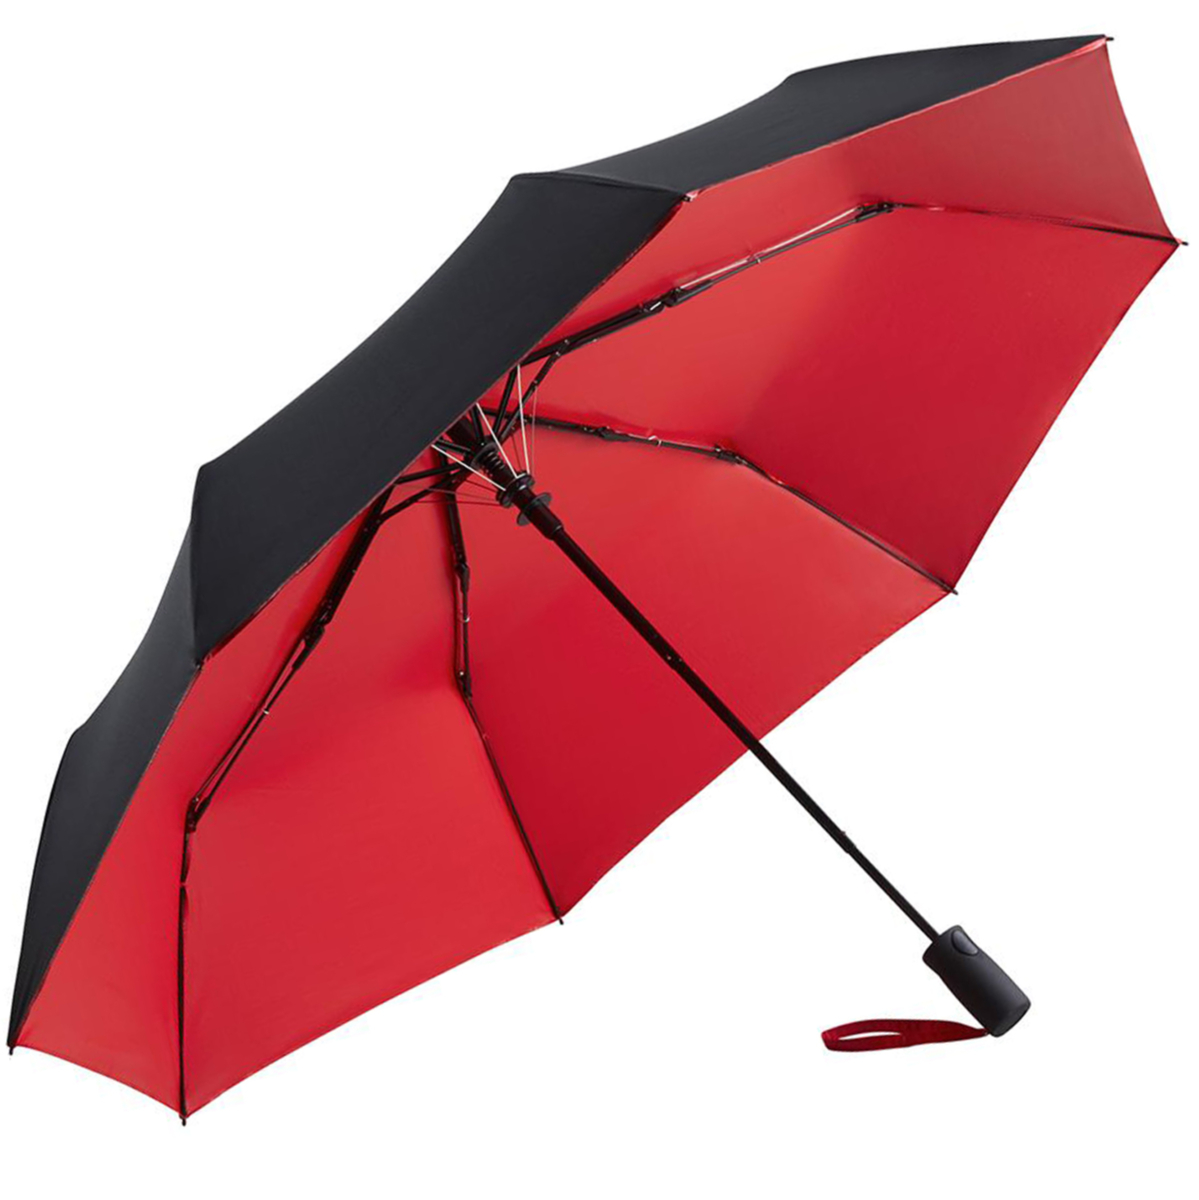 UV Protective SPF50+ Two-Tone Automatic Opening Folding Umbrella - Black & Red